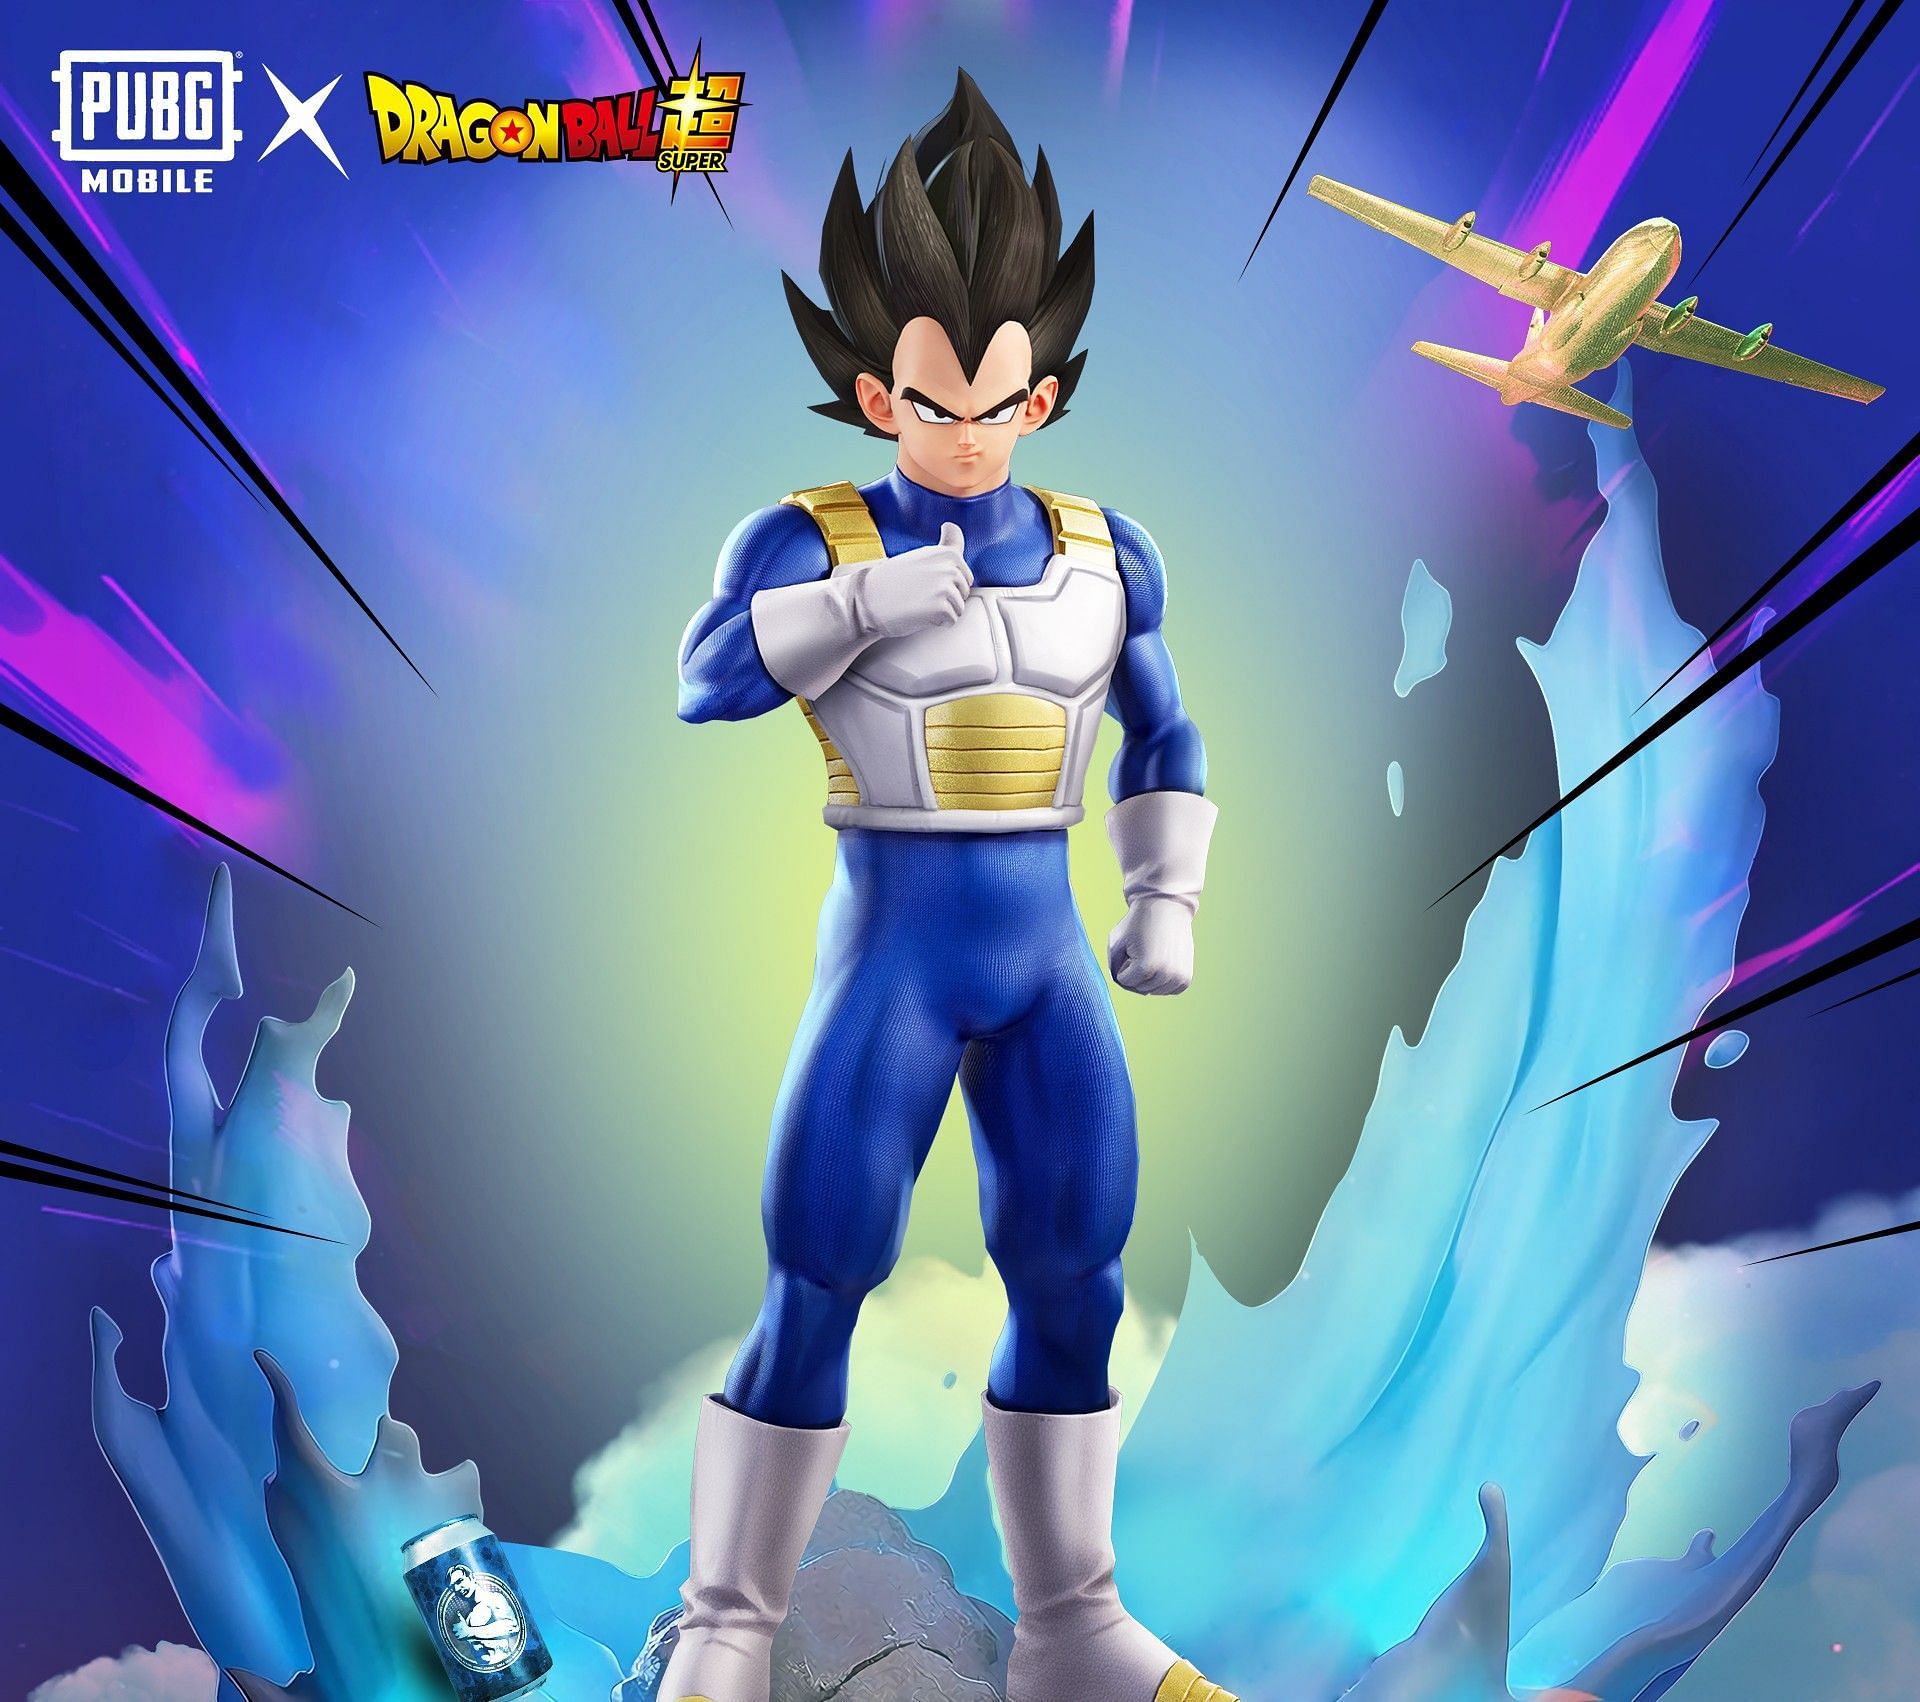 Vegeta from Dragon Ball Super in the game (Image via Tencent Games)